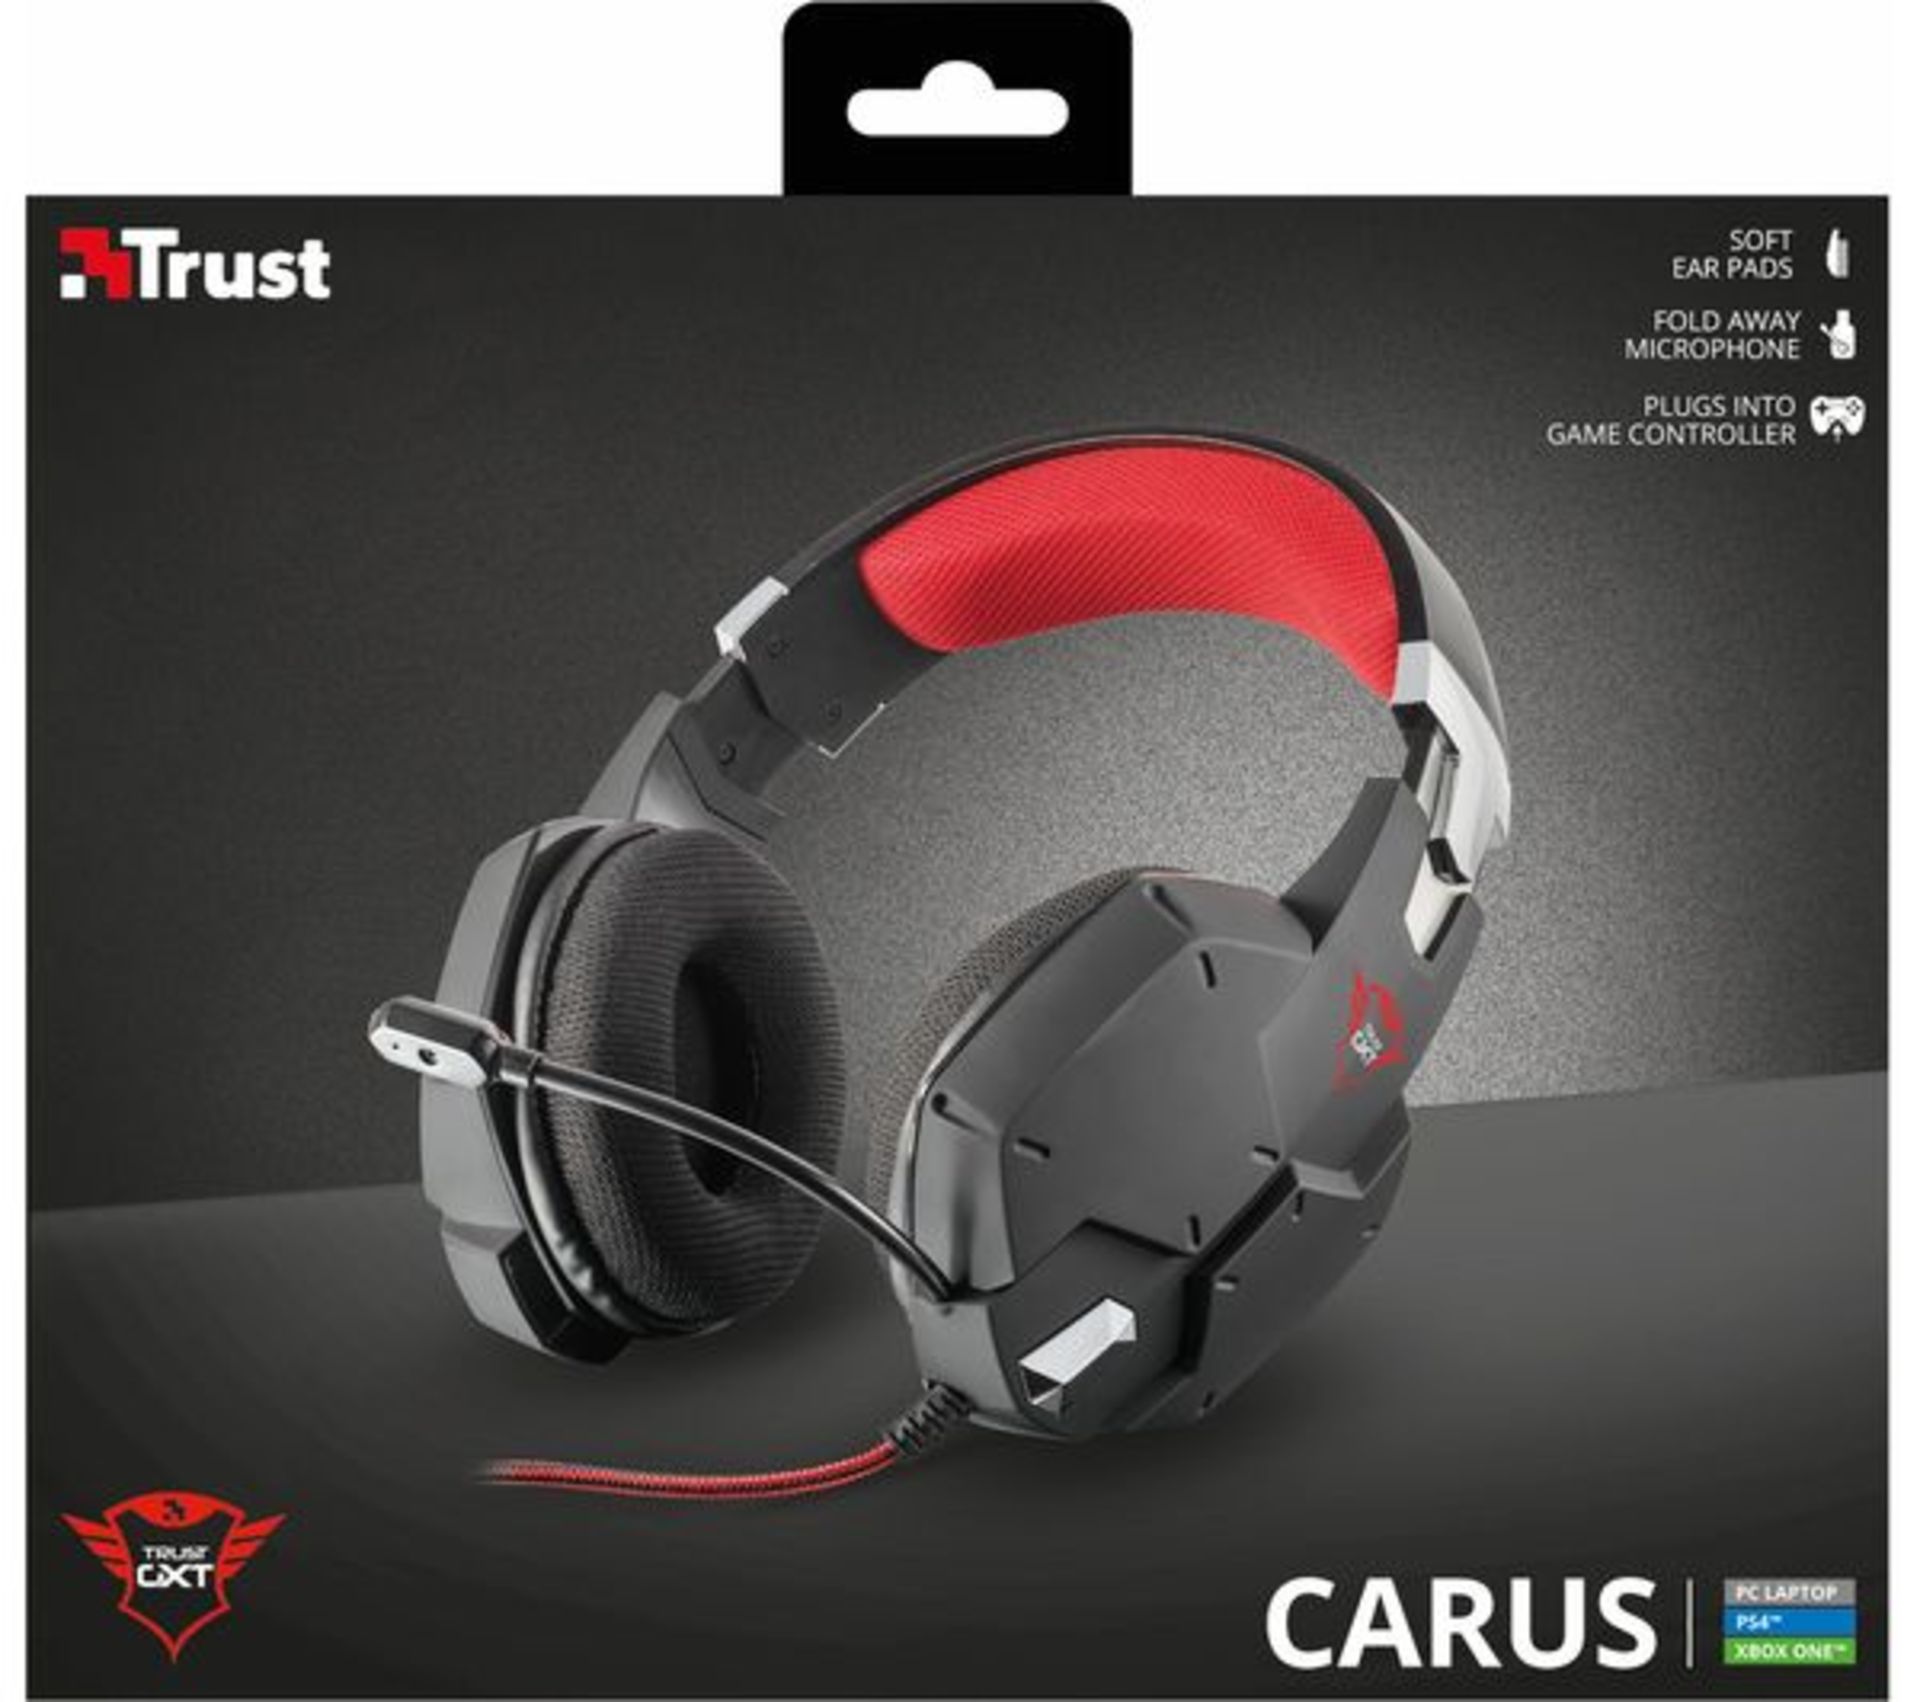 6 x Trust Carus Gaming Headsets. GXT 322.